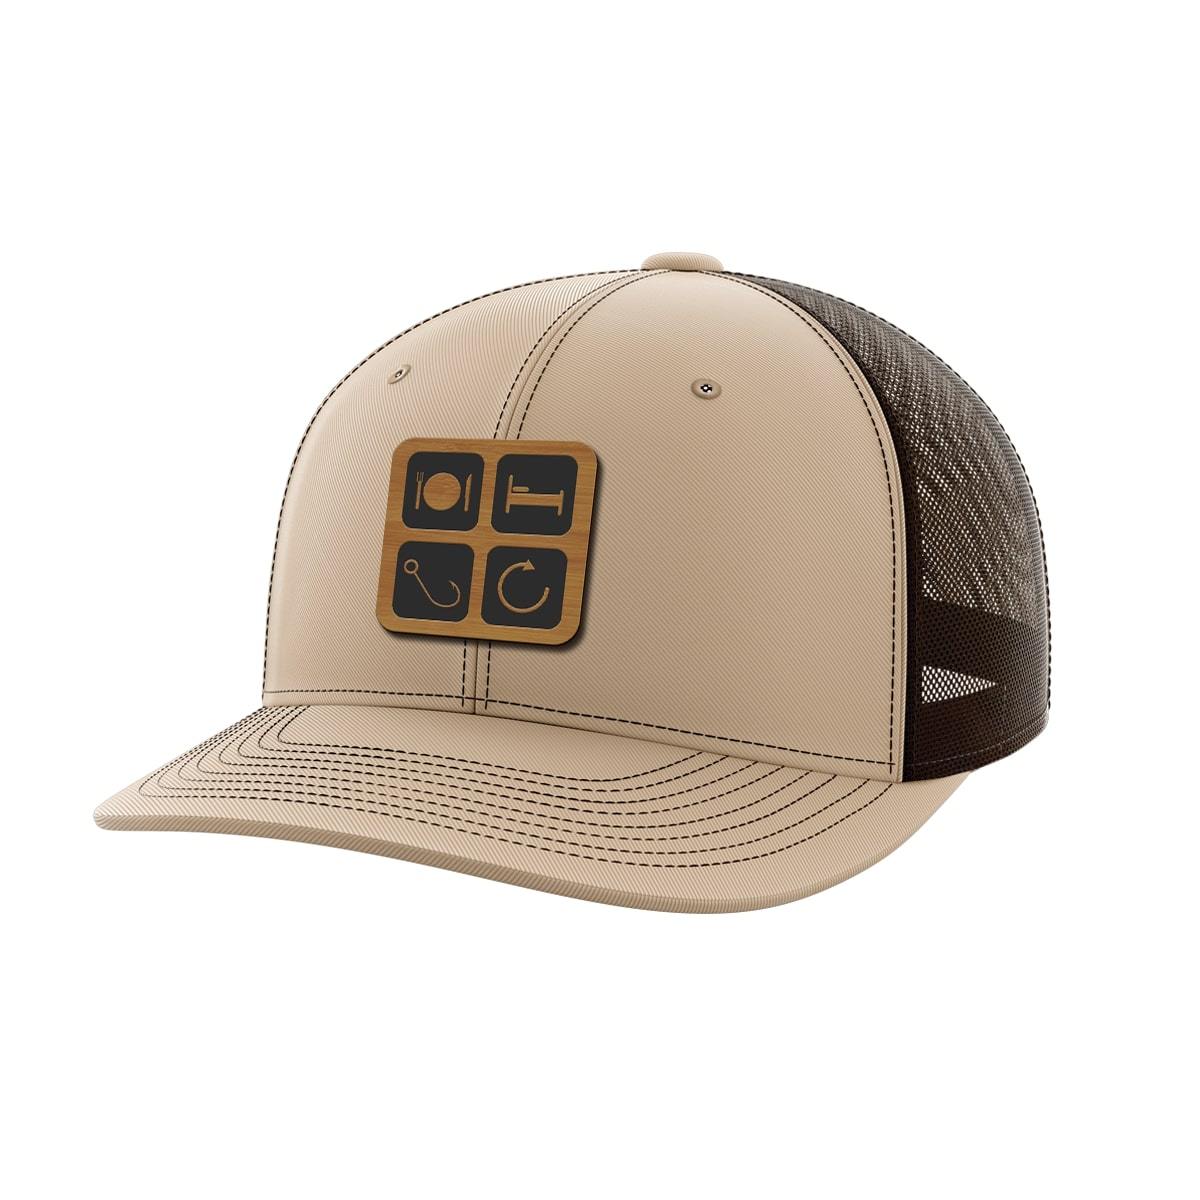 Eat Sleep Fish Repeat Bamboo Patch Hat - Greater Half